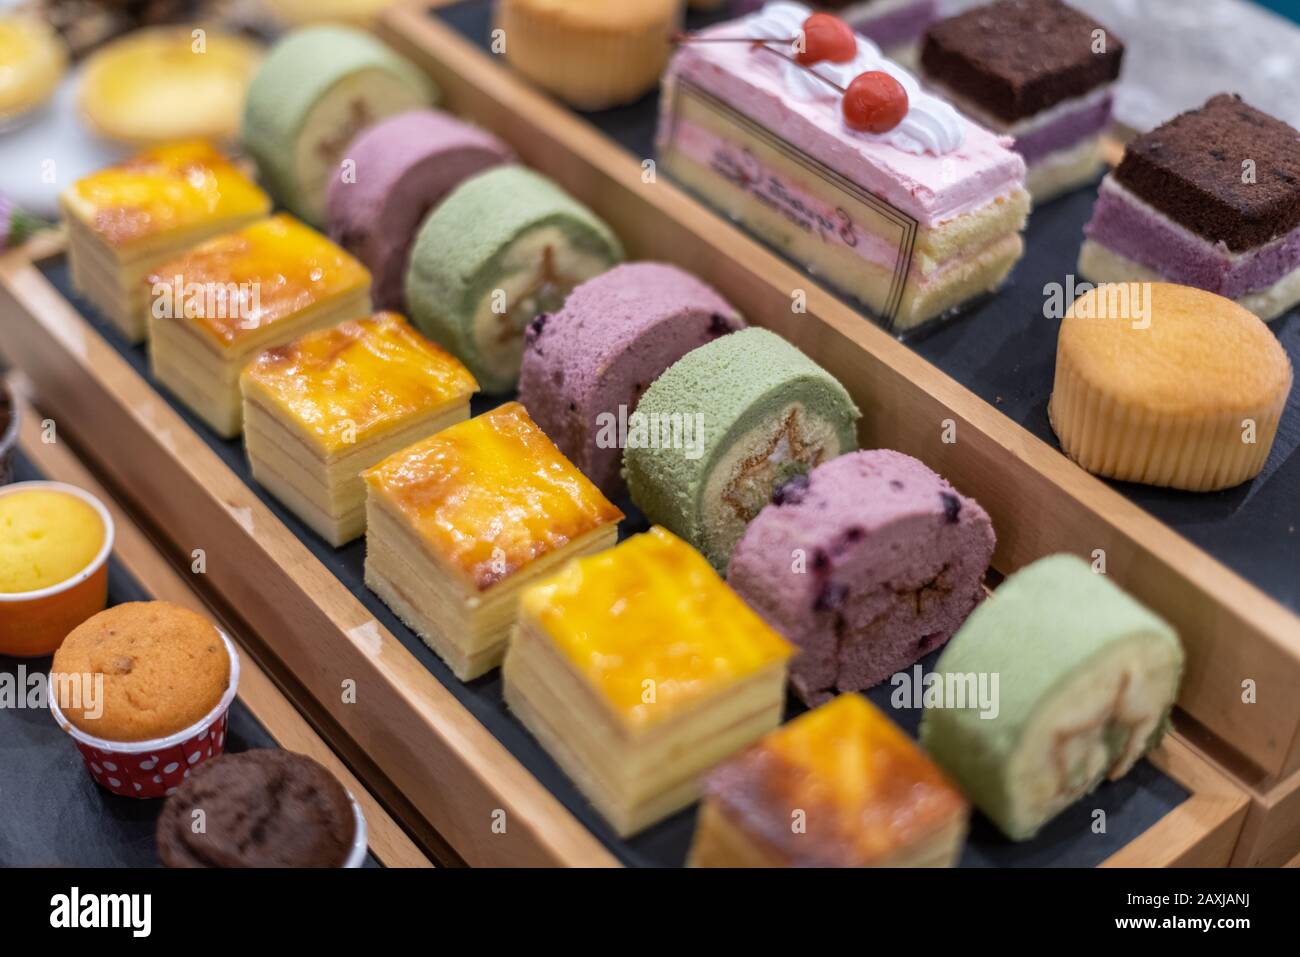 Delicious Cake Canapé in restaurant buffet Stock Photo